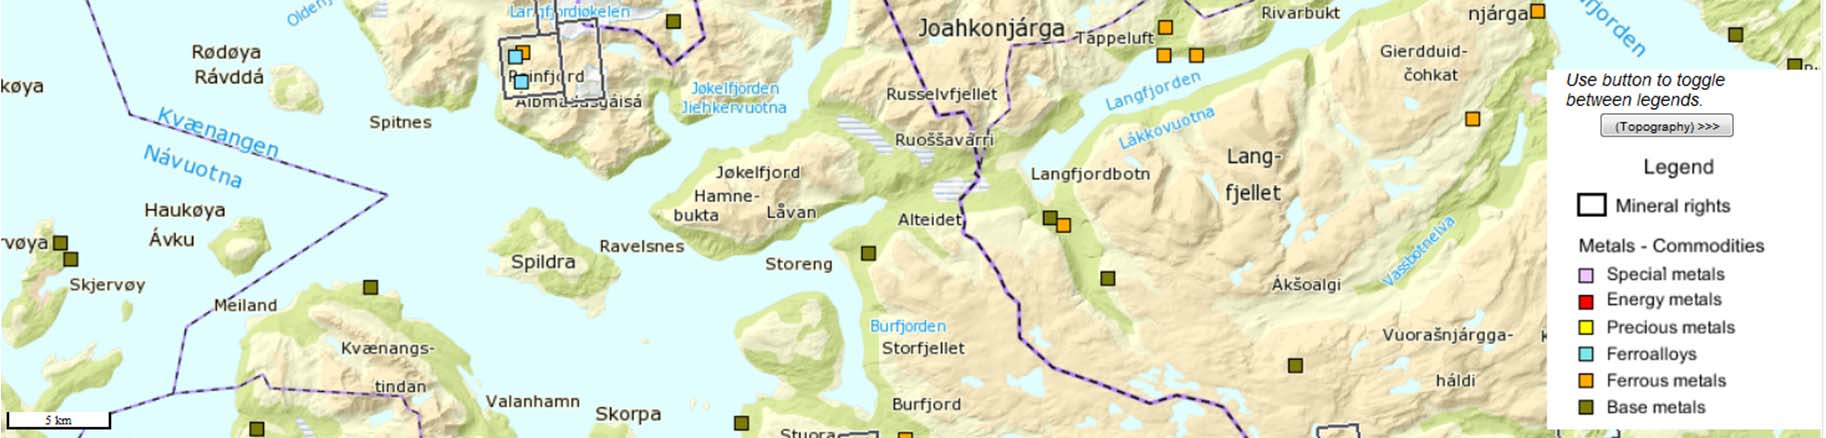 Claims NM Reinfjord Claims 5 km Leterettigheter areal: